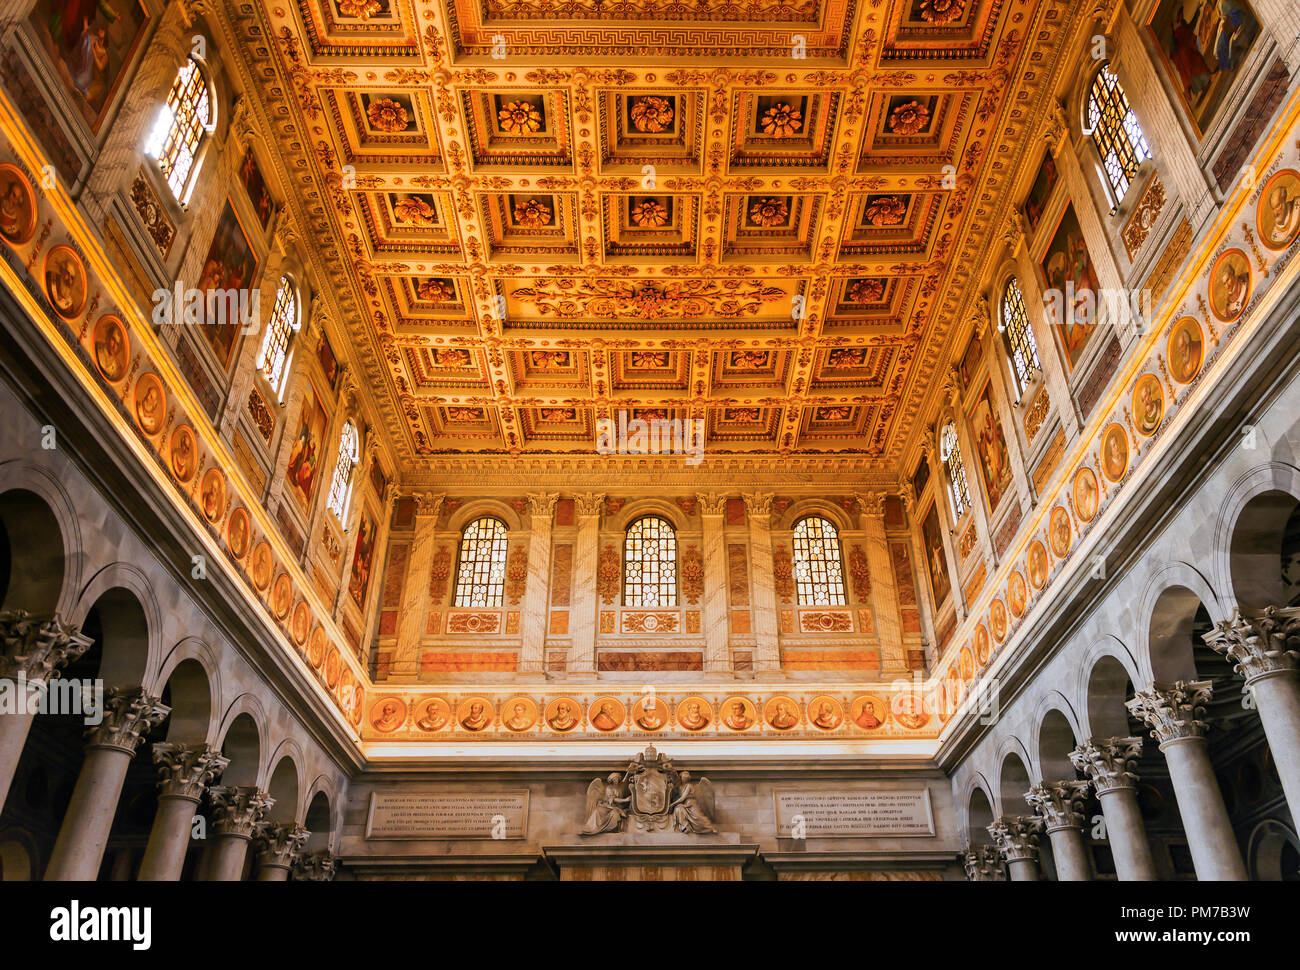 Rome, Italy, April 7th 2017: the ornate ceiling inside the basilica of St Paul outside the walls in Rome Stock Photo